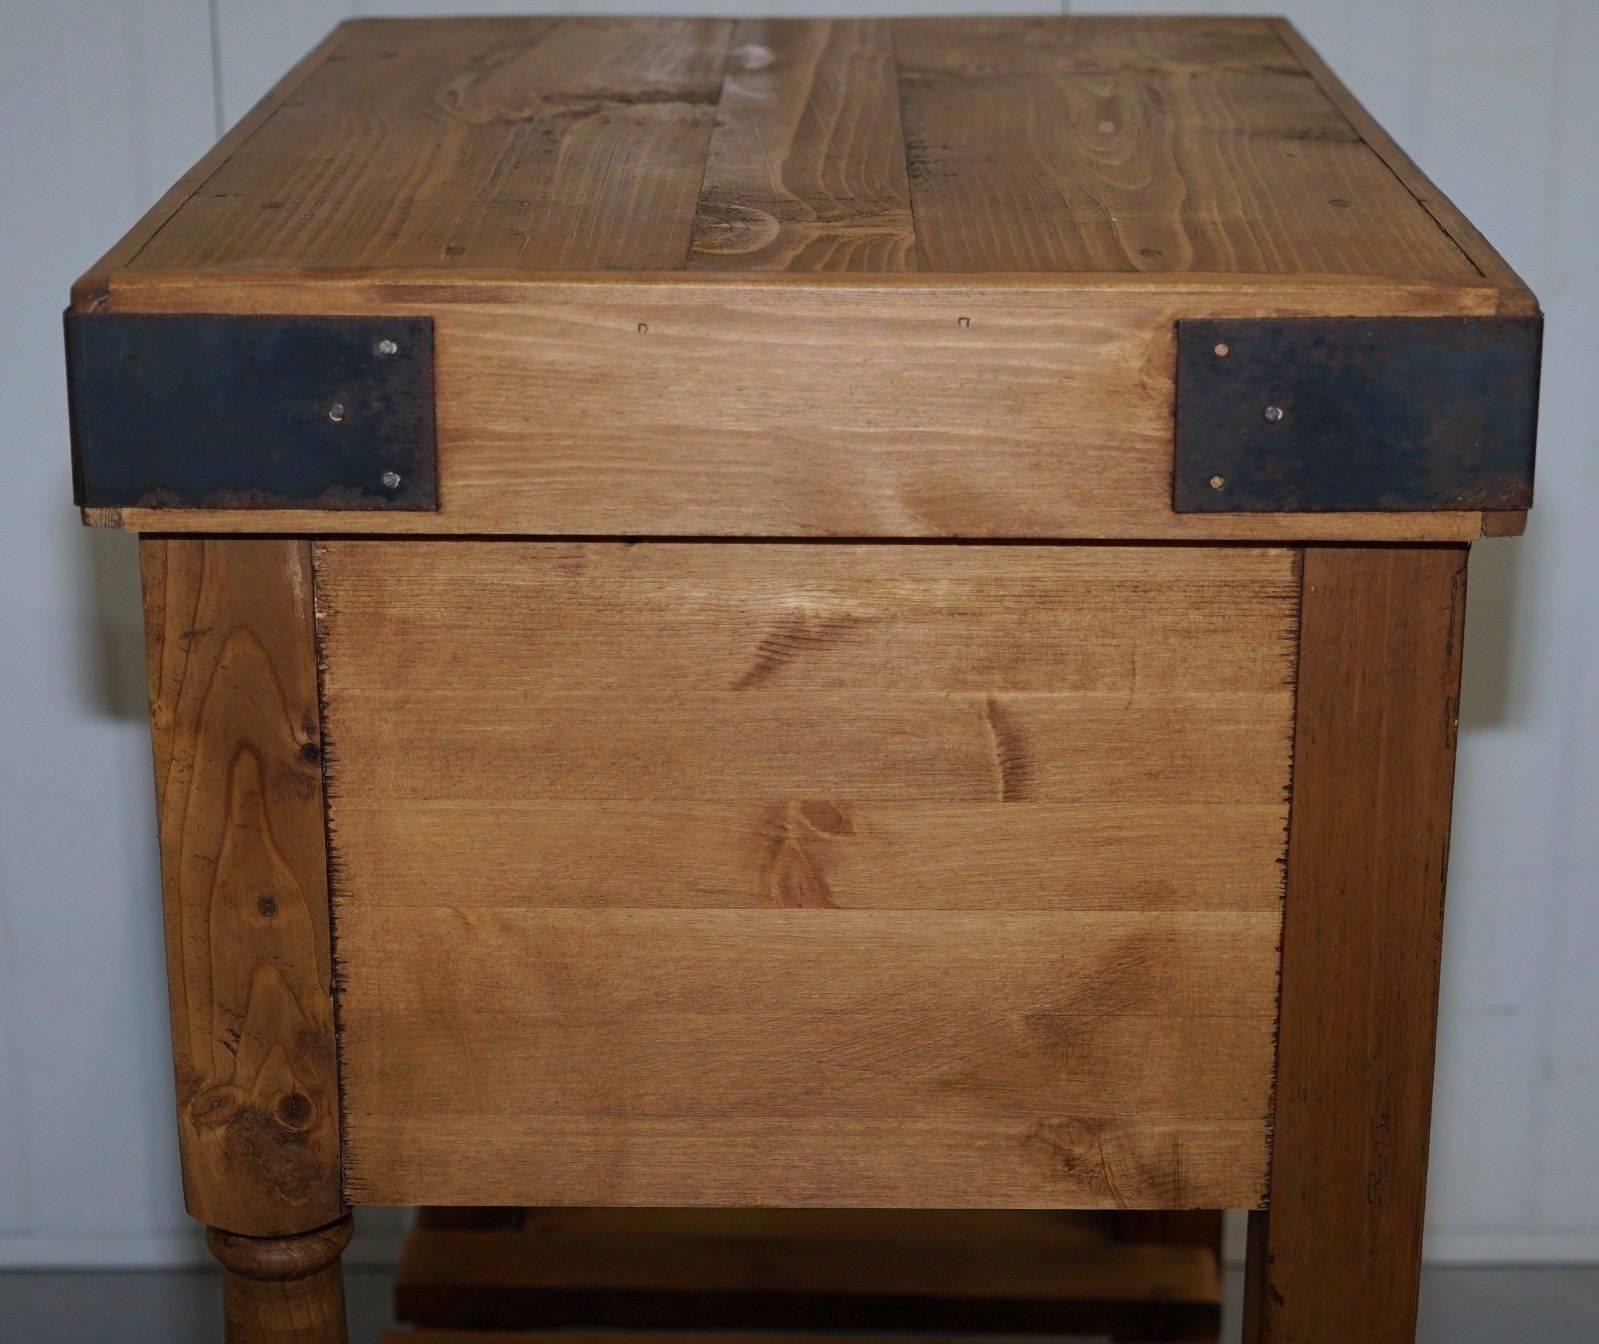 20th Century Very Nice Solid Wood Butchers Block with Large Central Drawer Handy Kitchen Aid